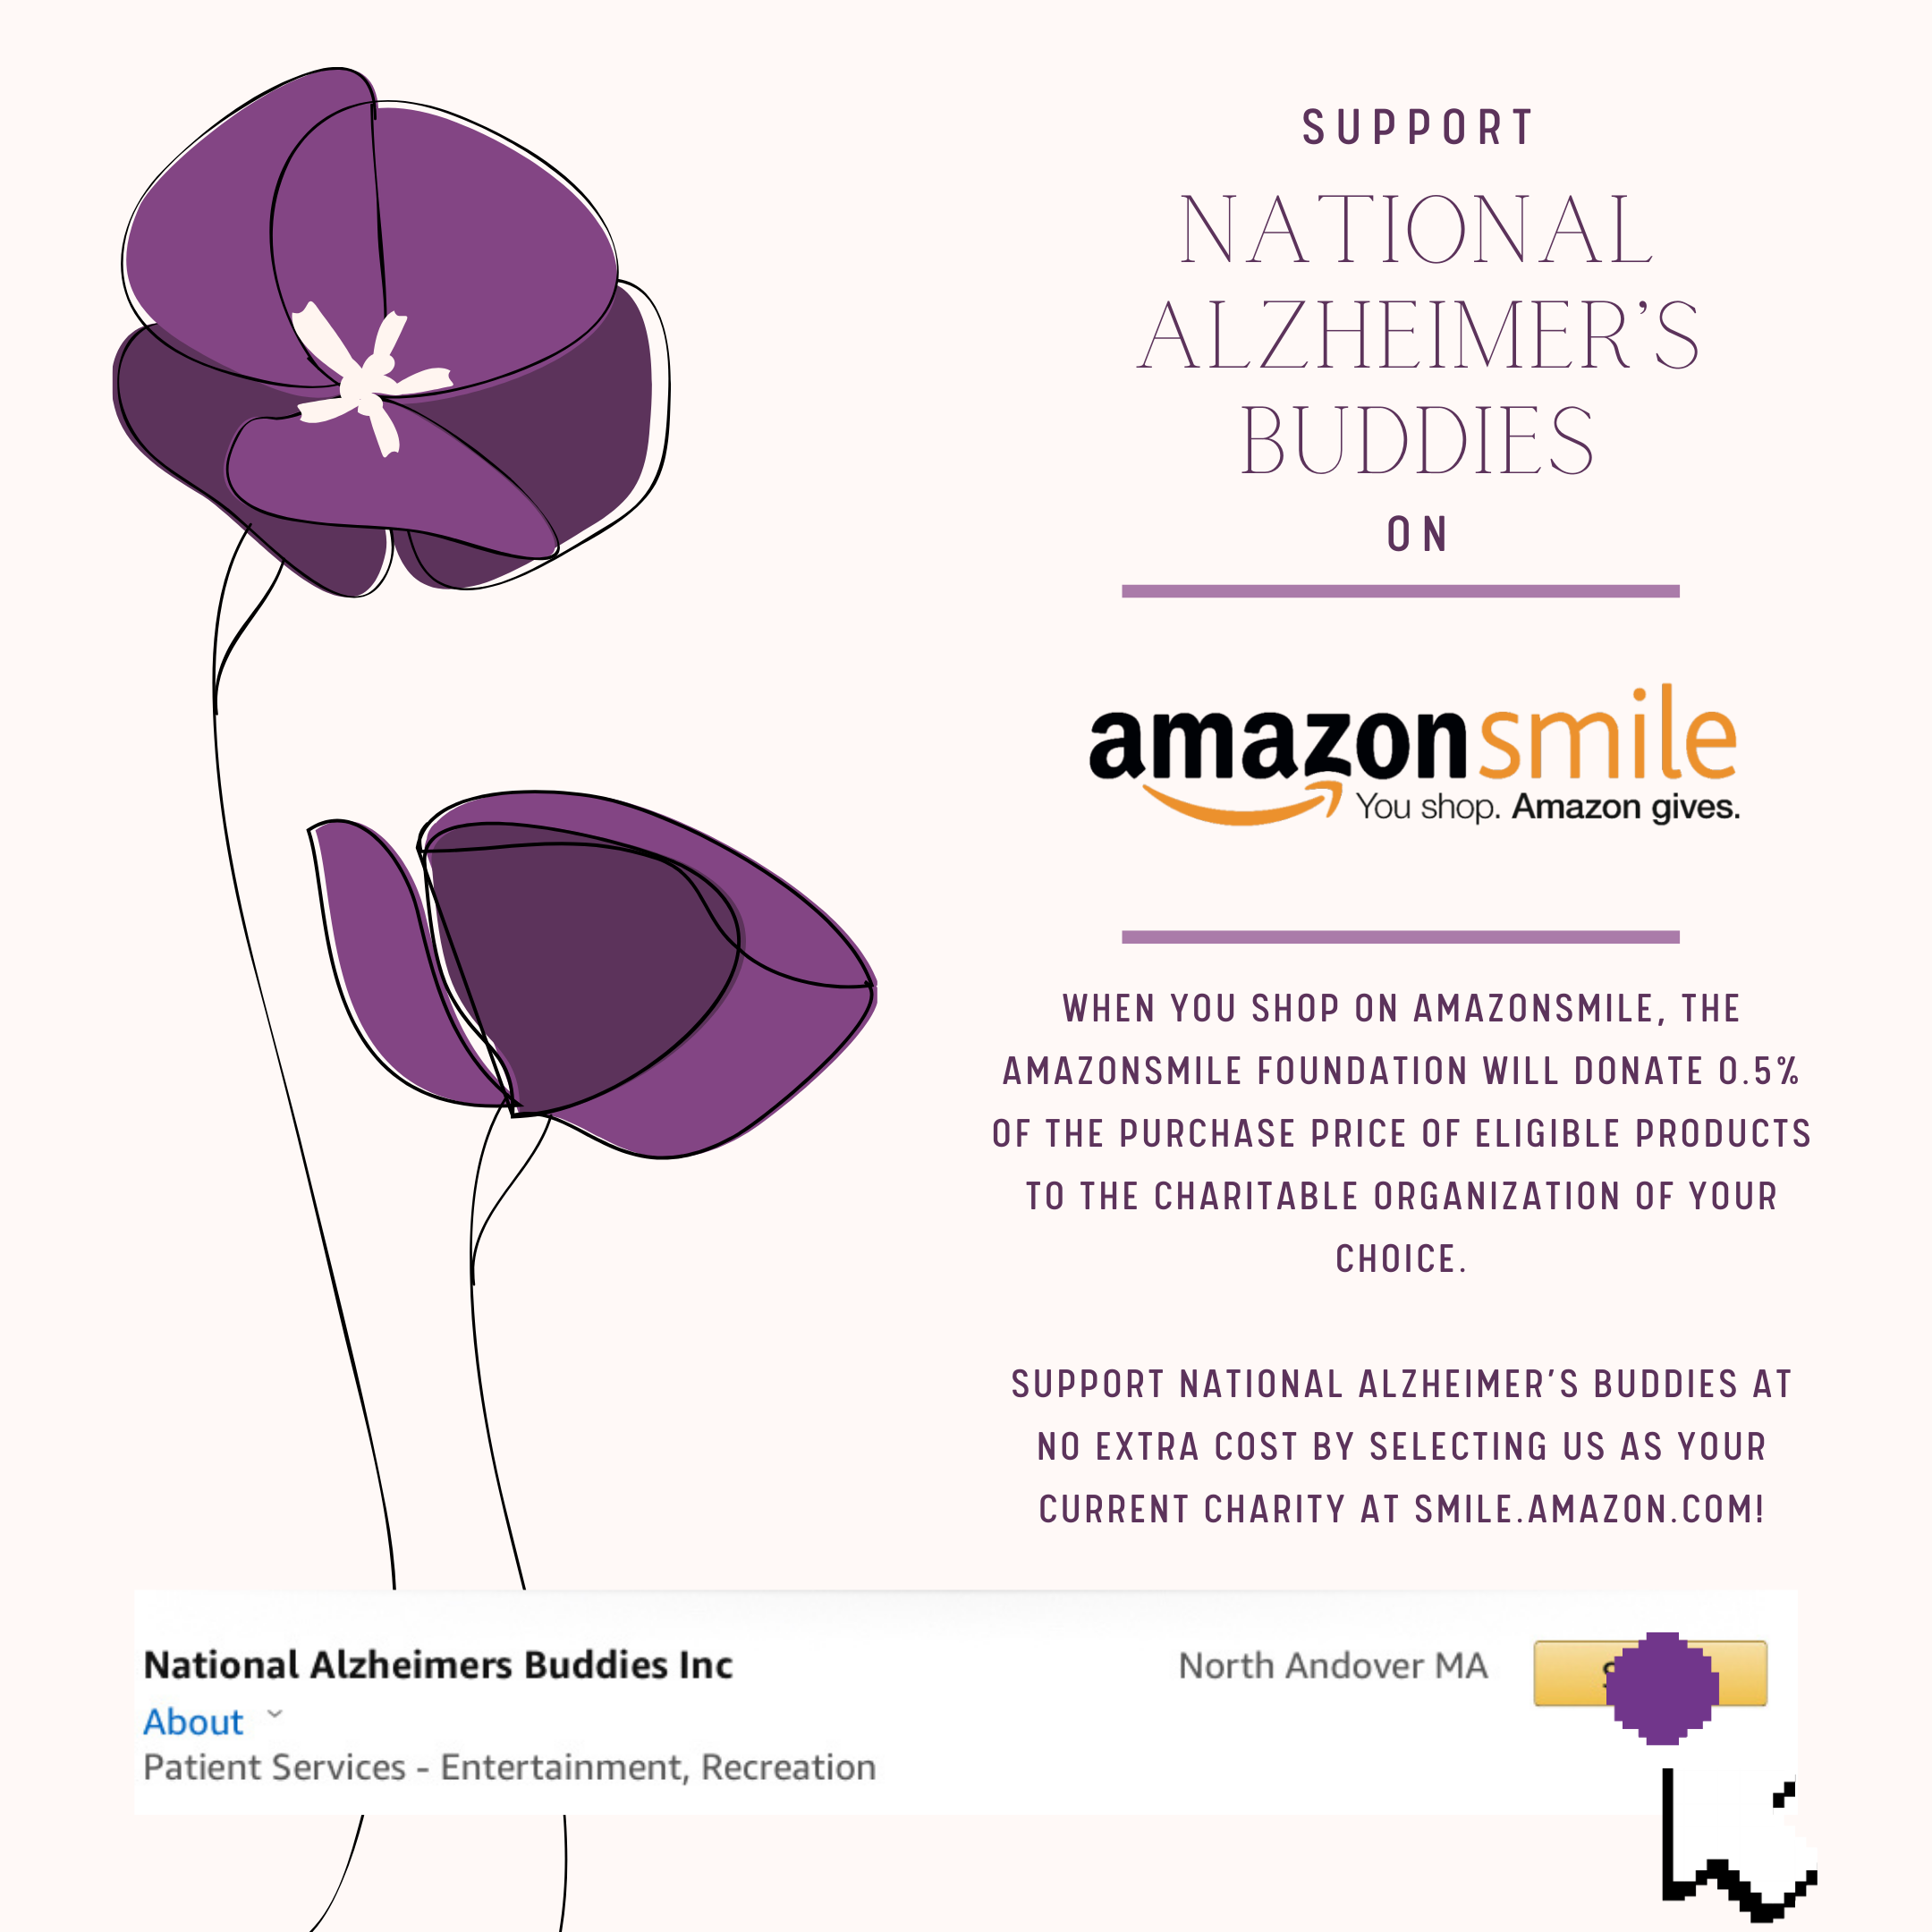 Use our Amazon Smile link